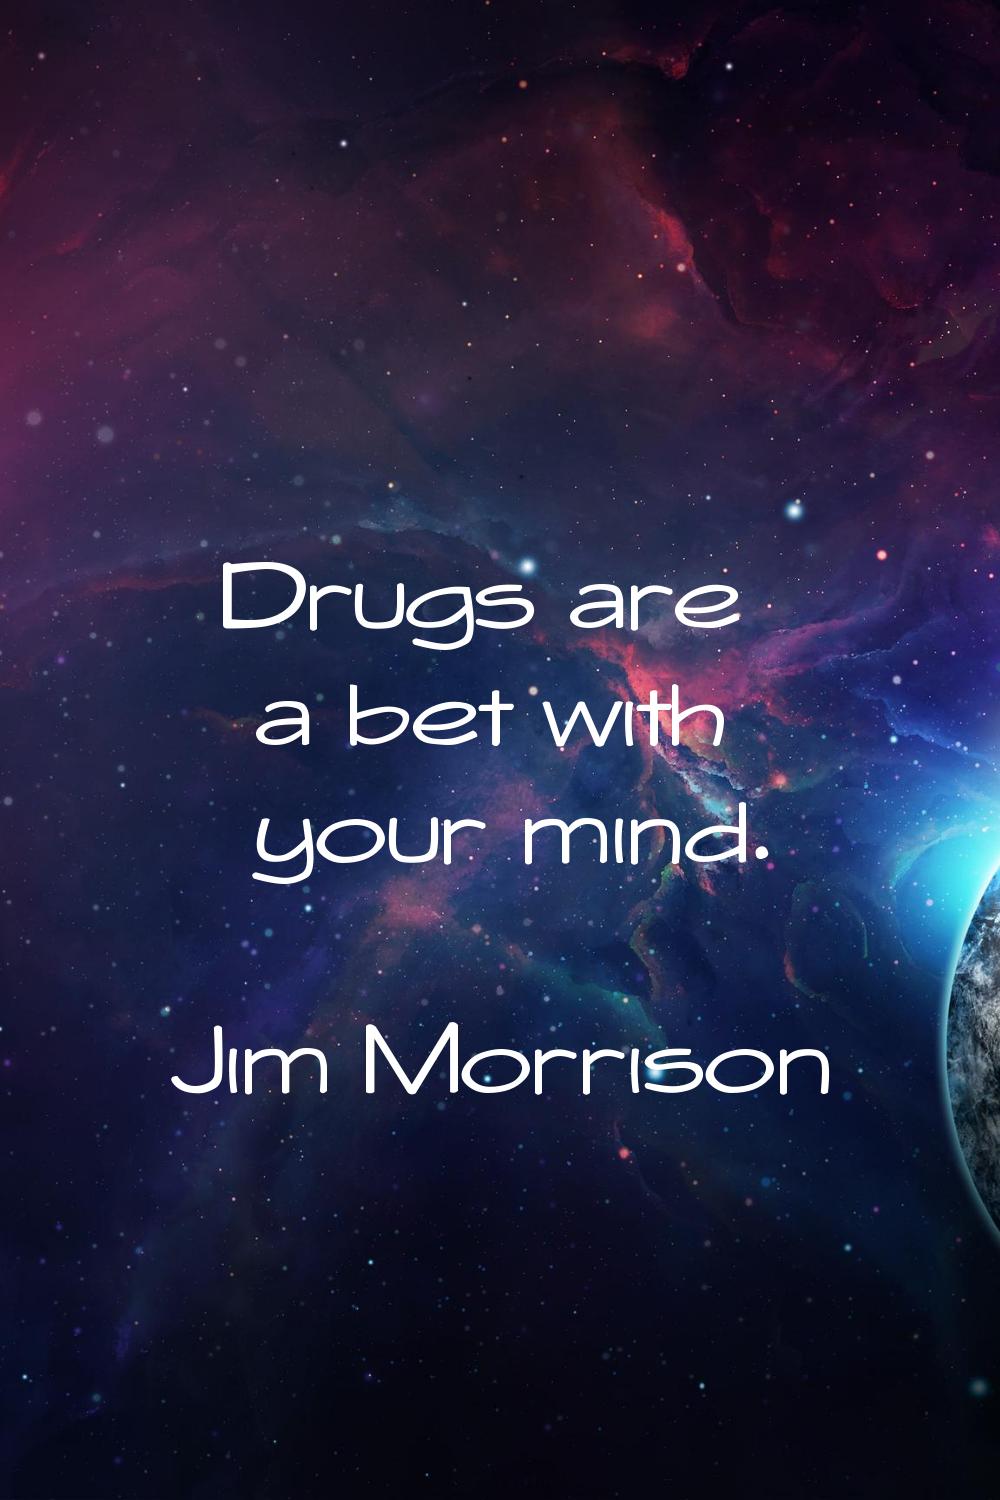 Drugs are a bet with your mind.